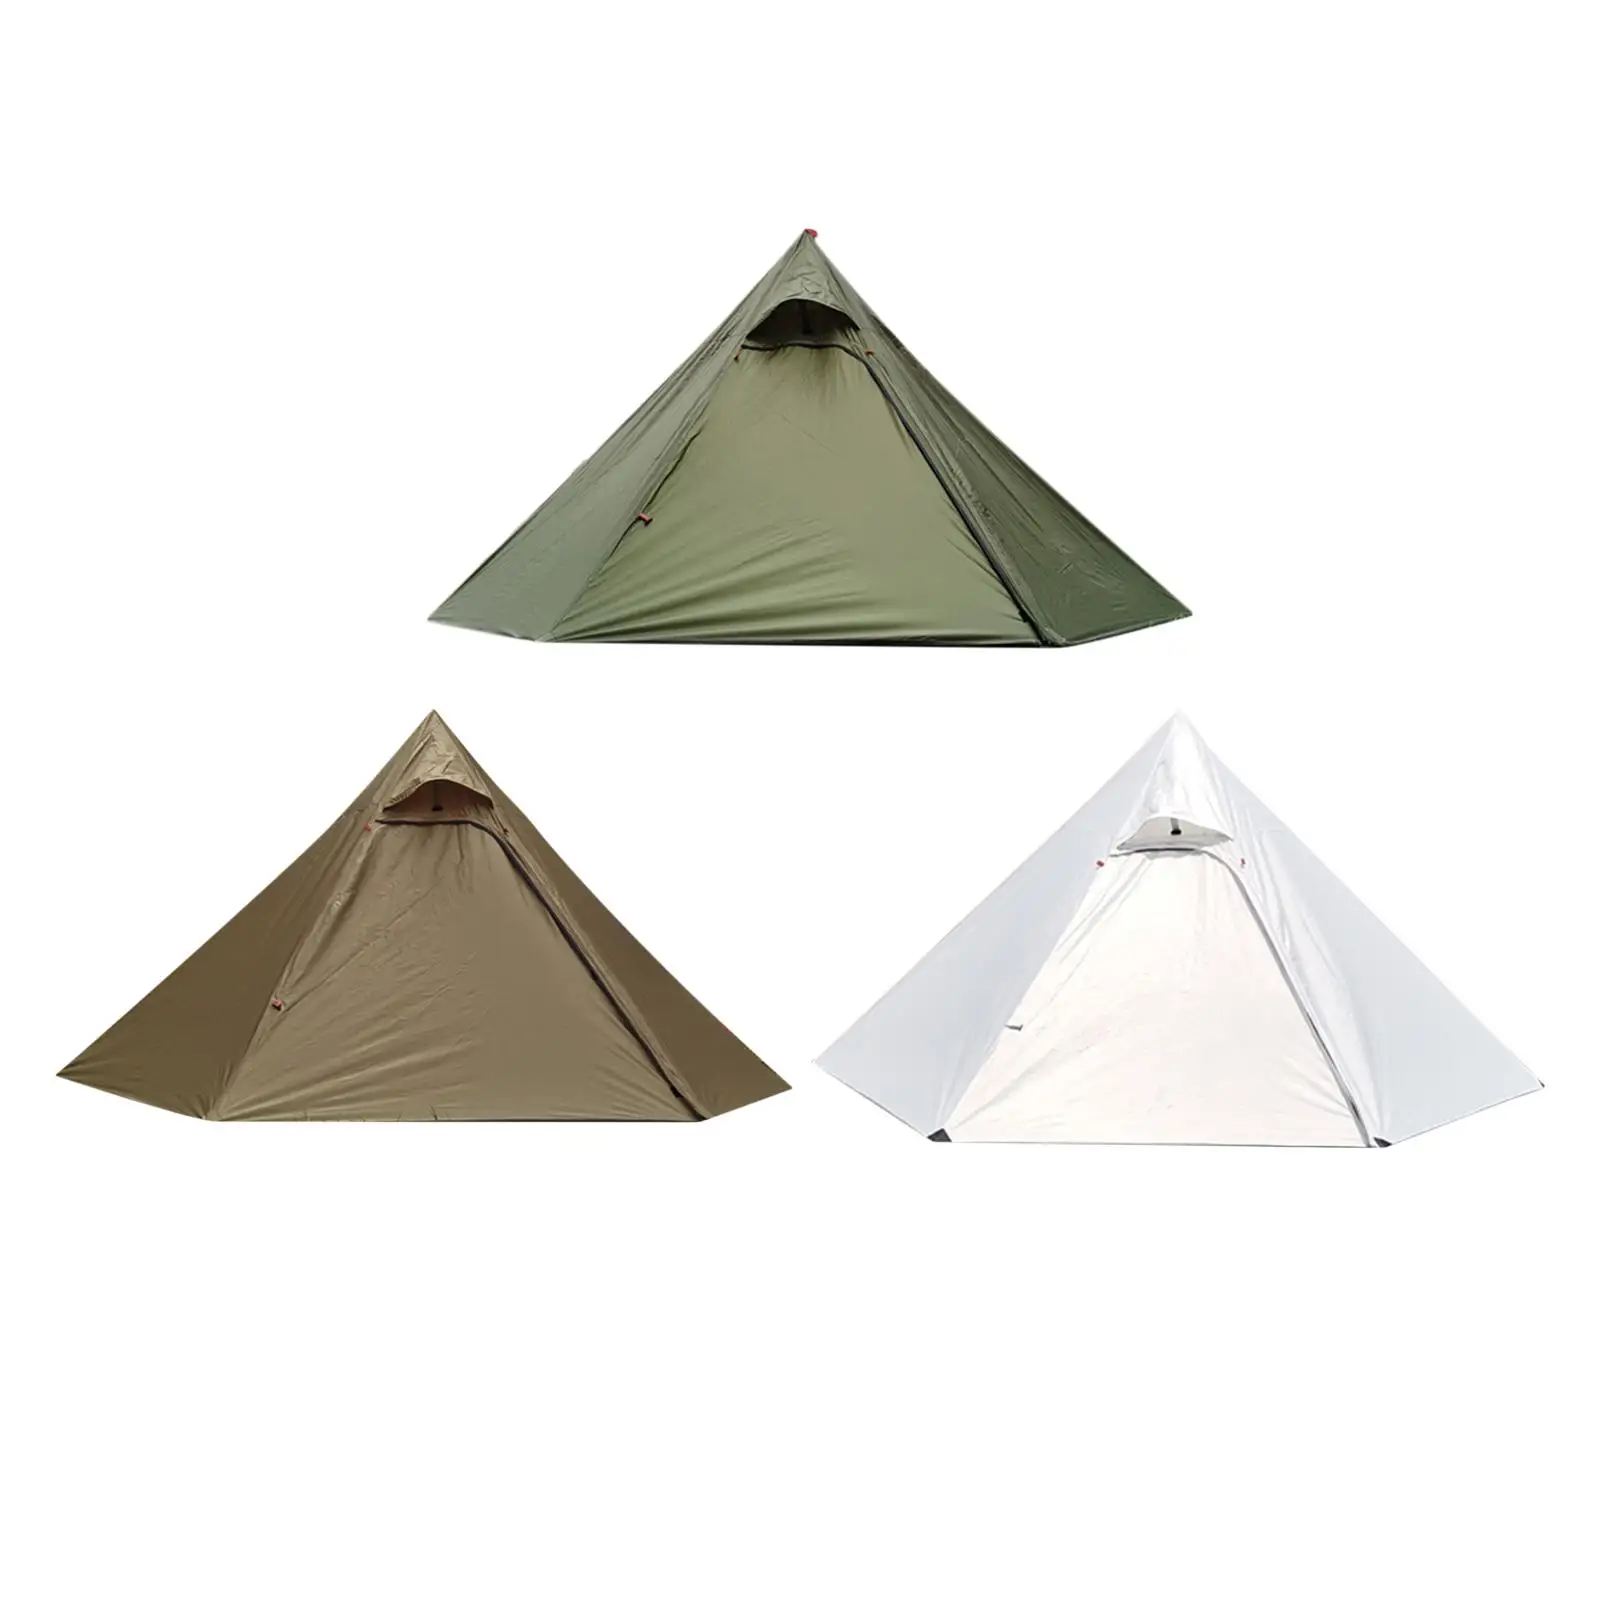 Pyramid Tent Waterproof Camping Teepee Ripstop 2-3 Person for Backpacking Hiking